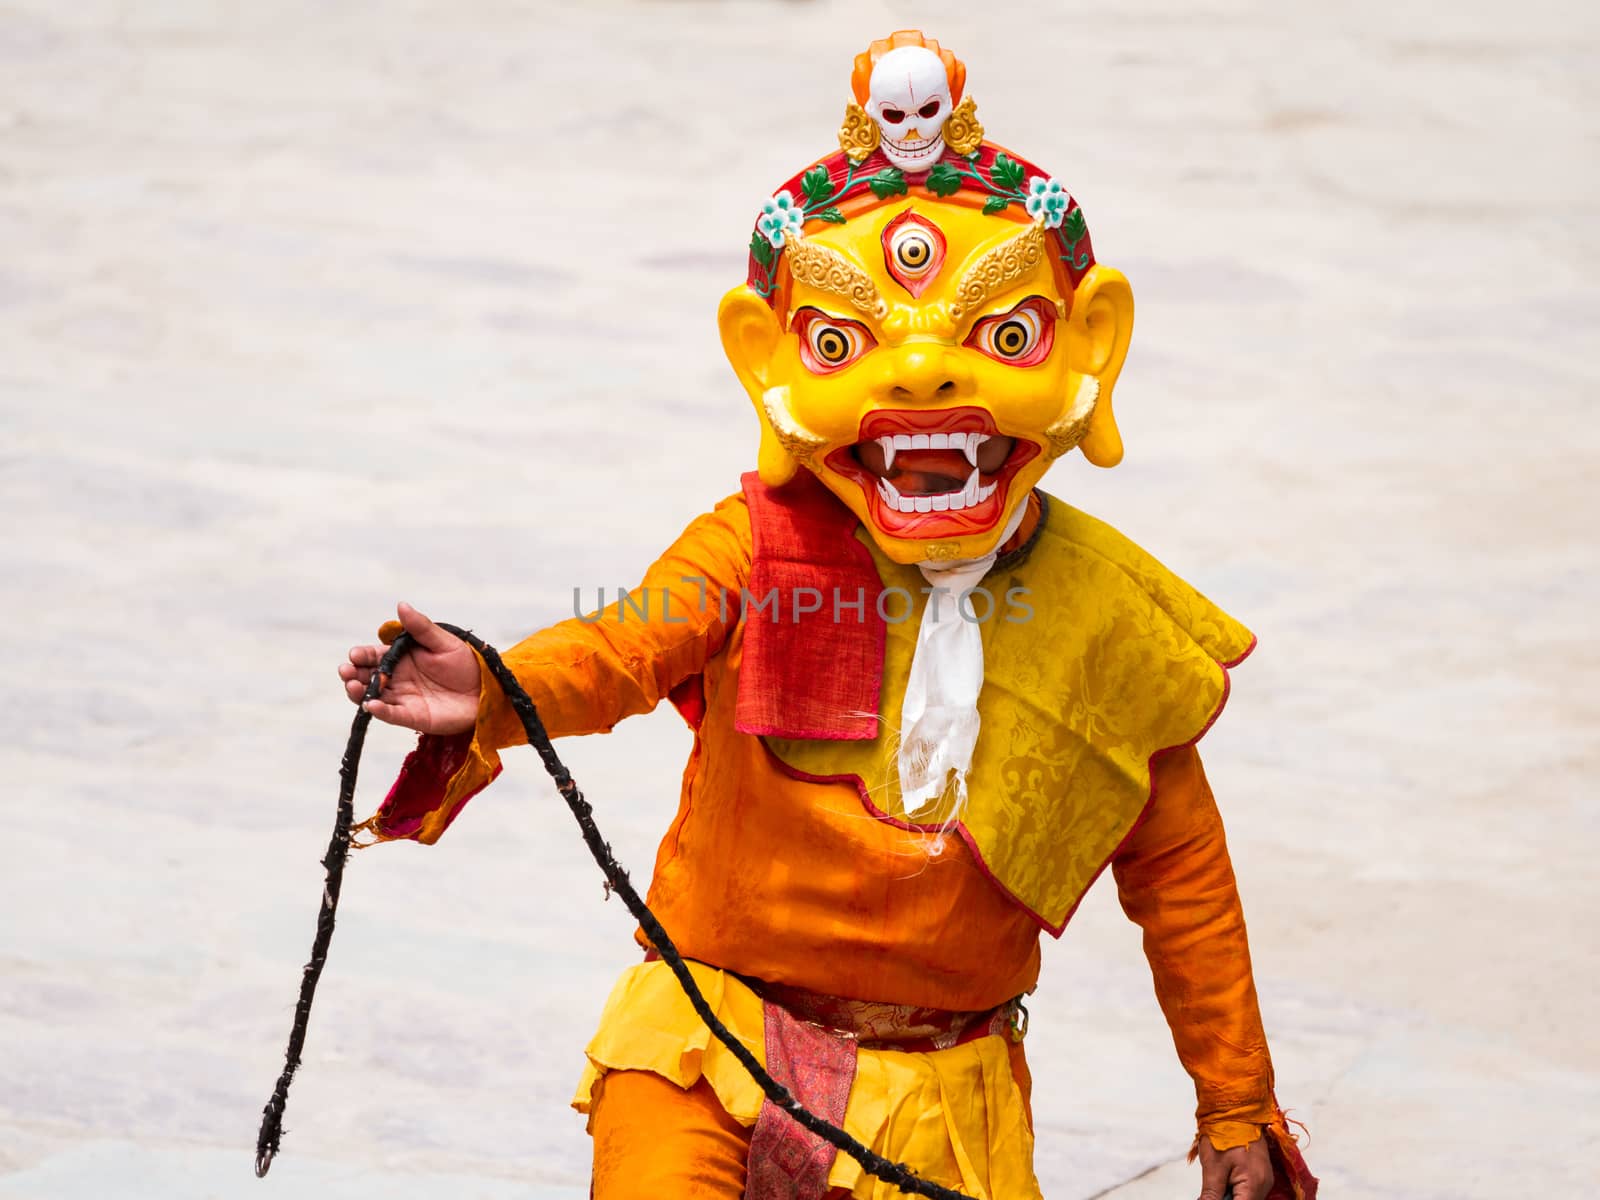 Lama performs a religious masked and costumed mystery dance of Tibetan Buddhism during the Cham Dance Festival by straannick